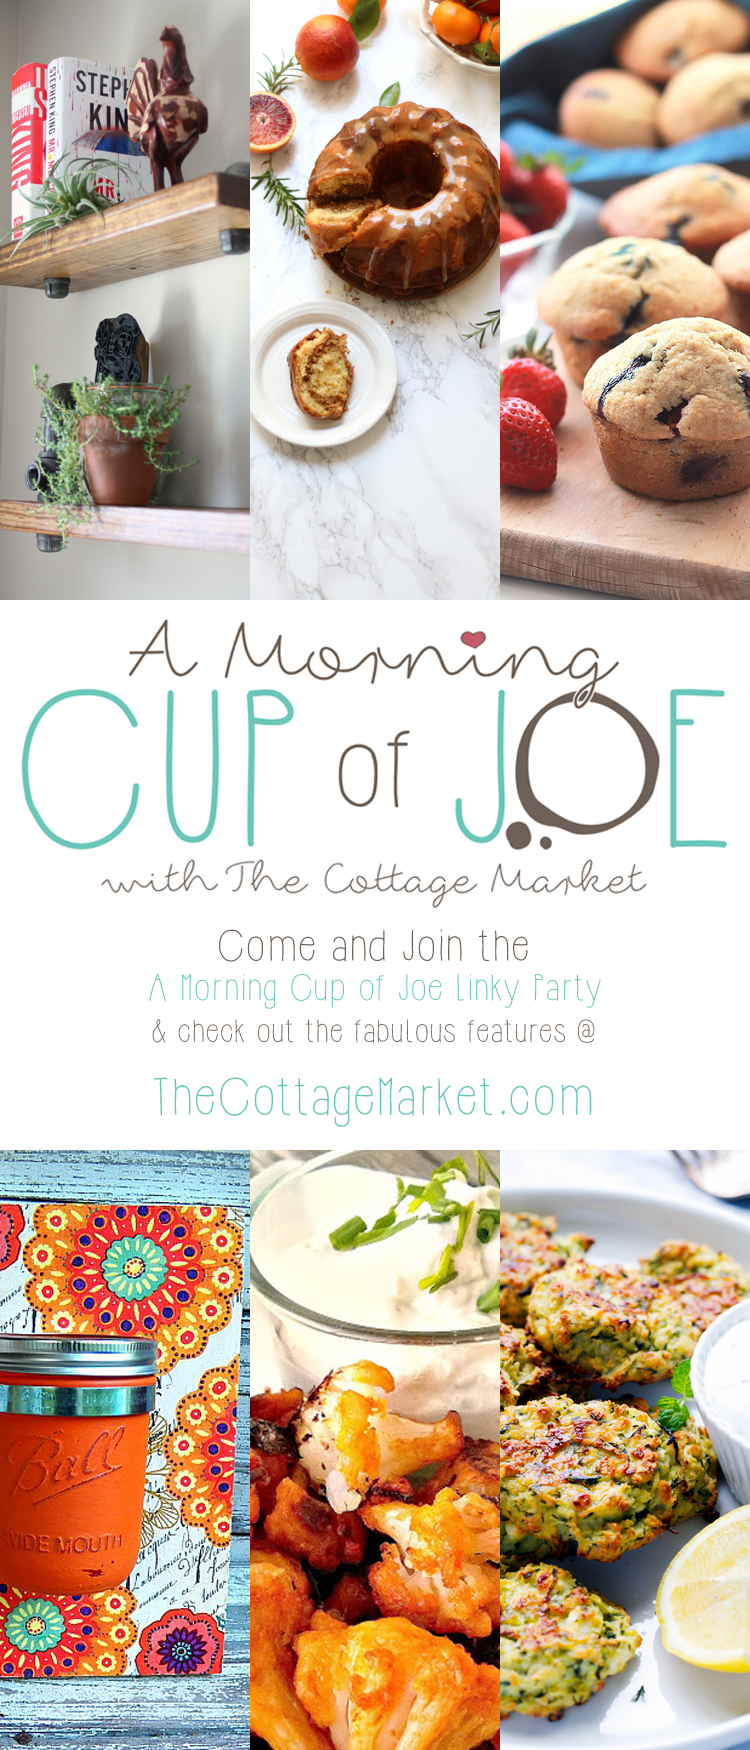 http://thecottagemarket.com/wp-content/uploads/2016/03/cuppa31116.png